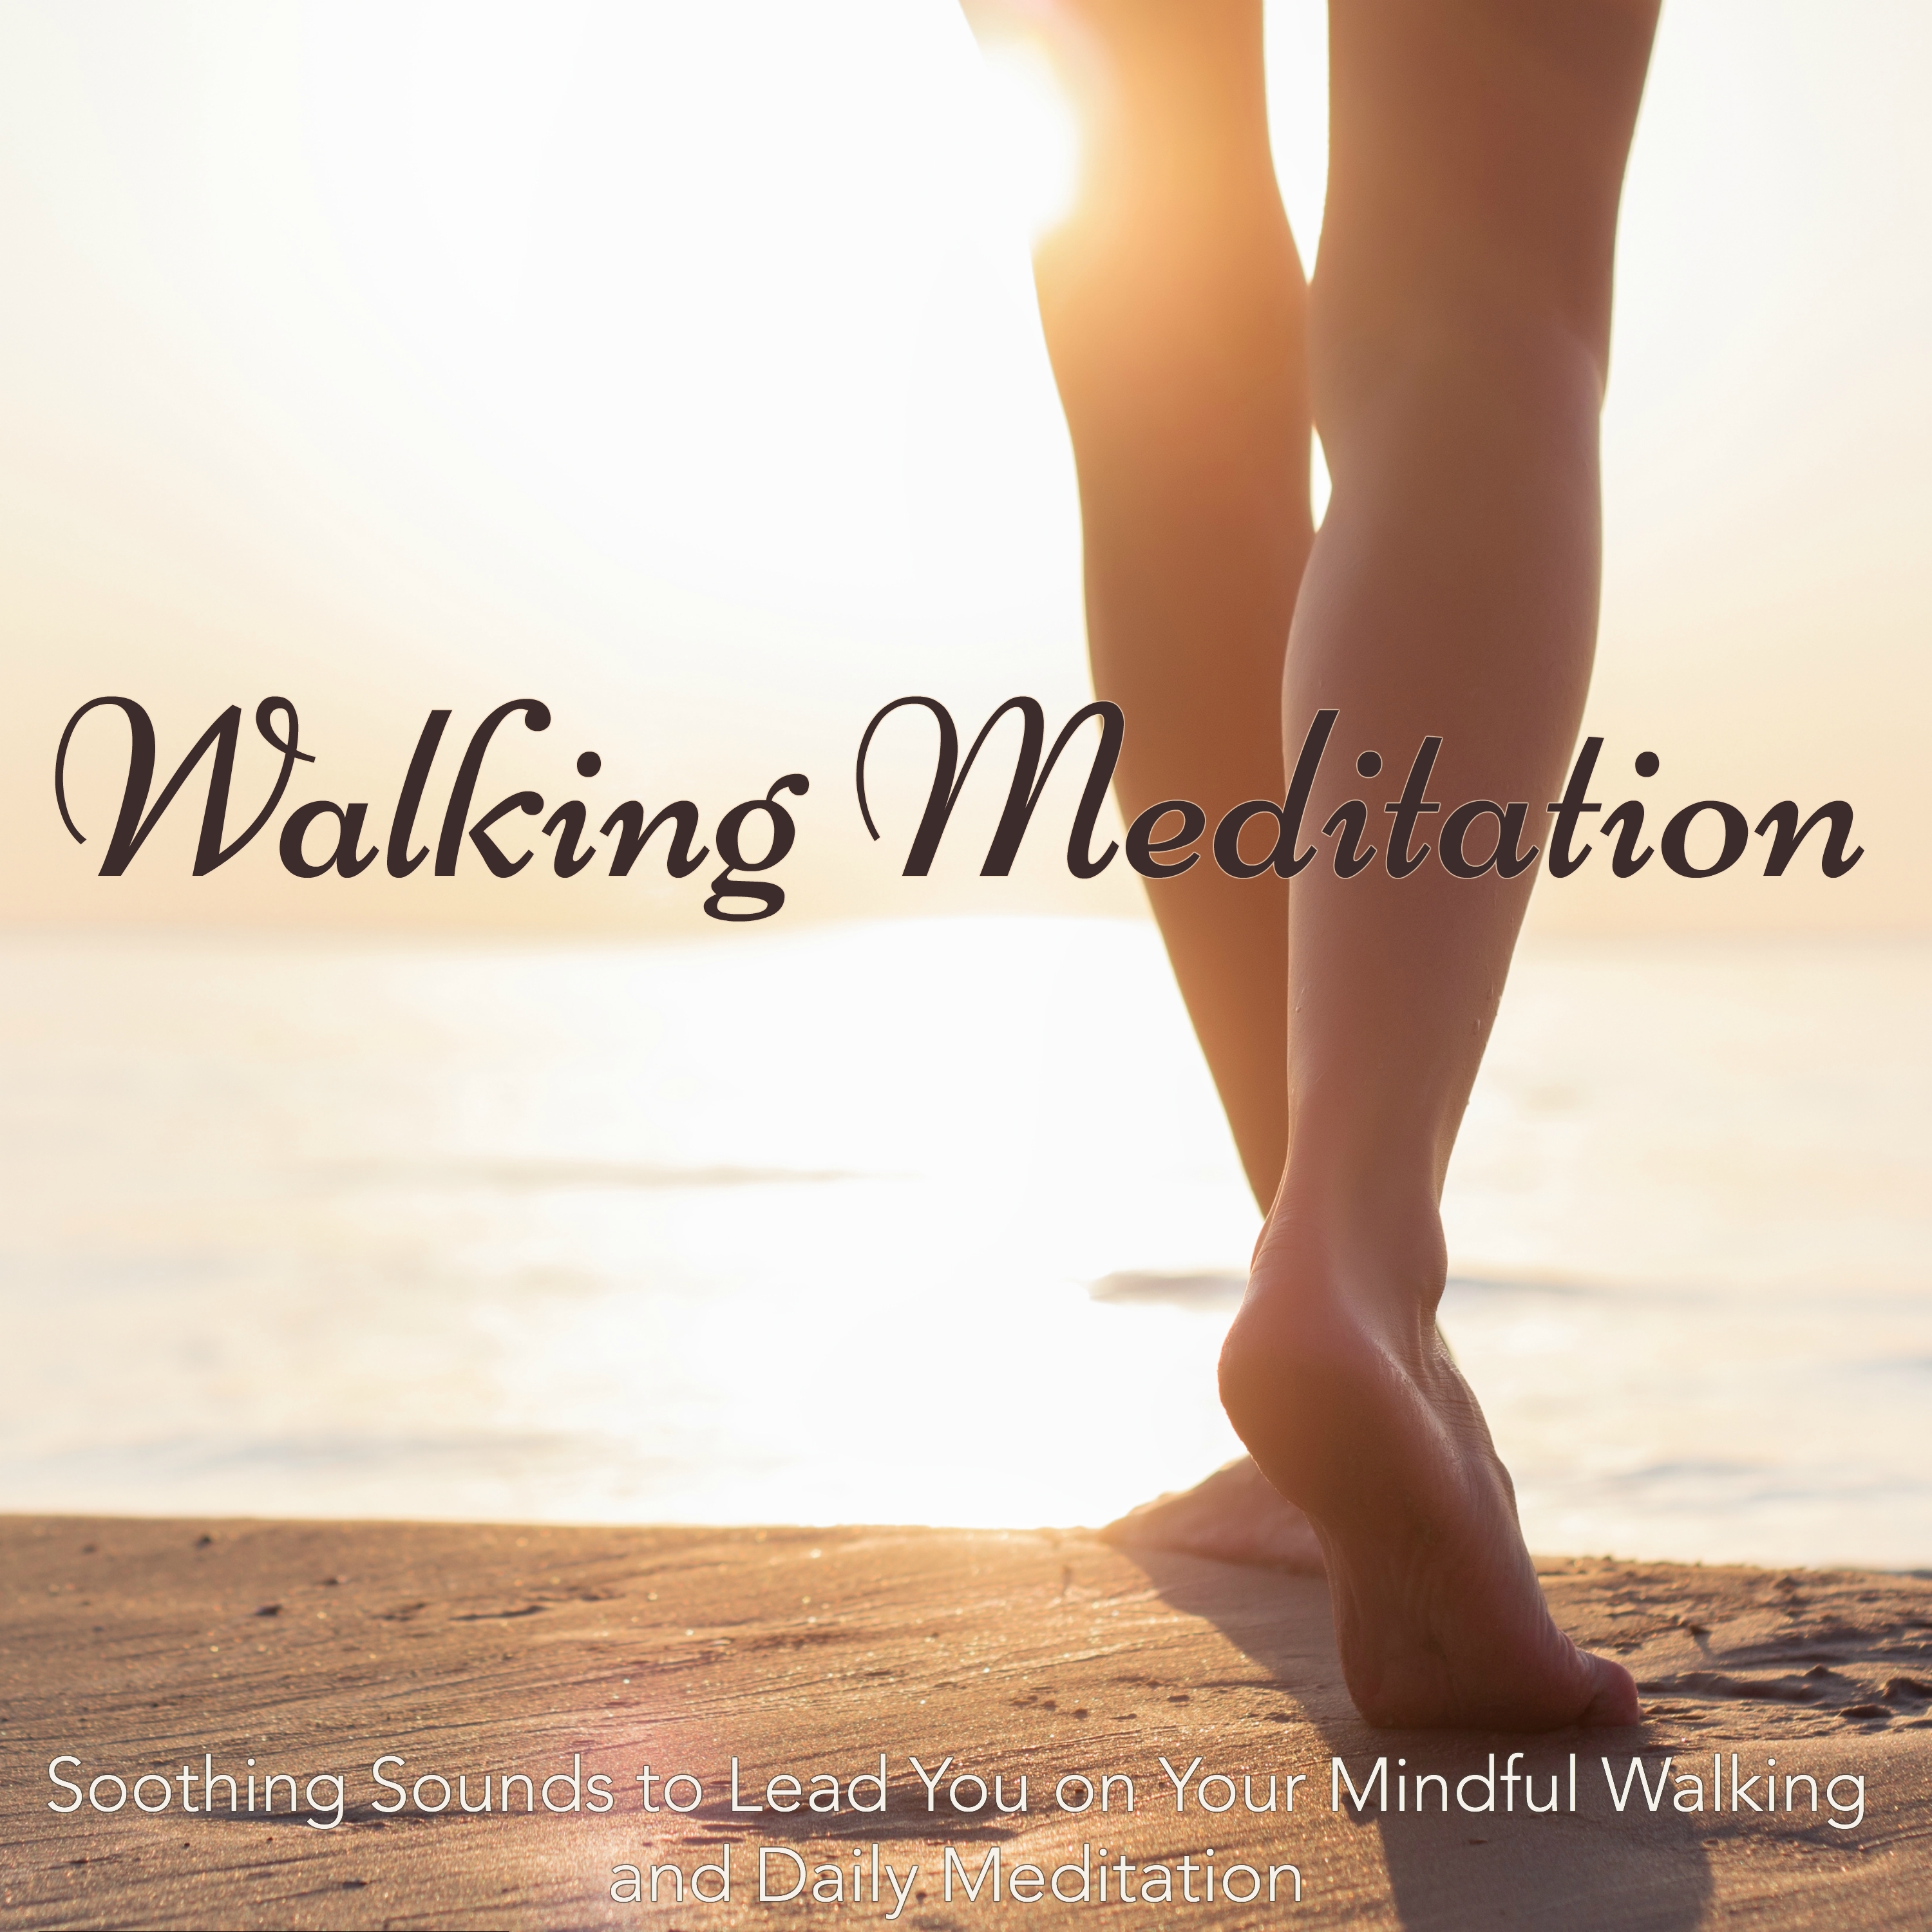 Walking Meditation – Soothing Sounds to Lead You on Your Mindful Walking and Daily Meditation